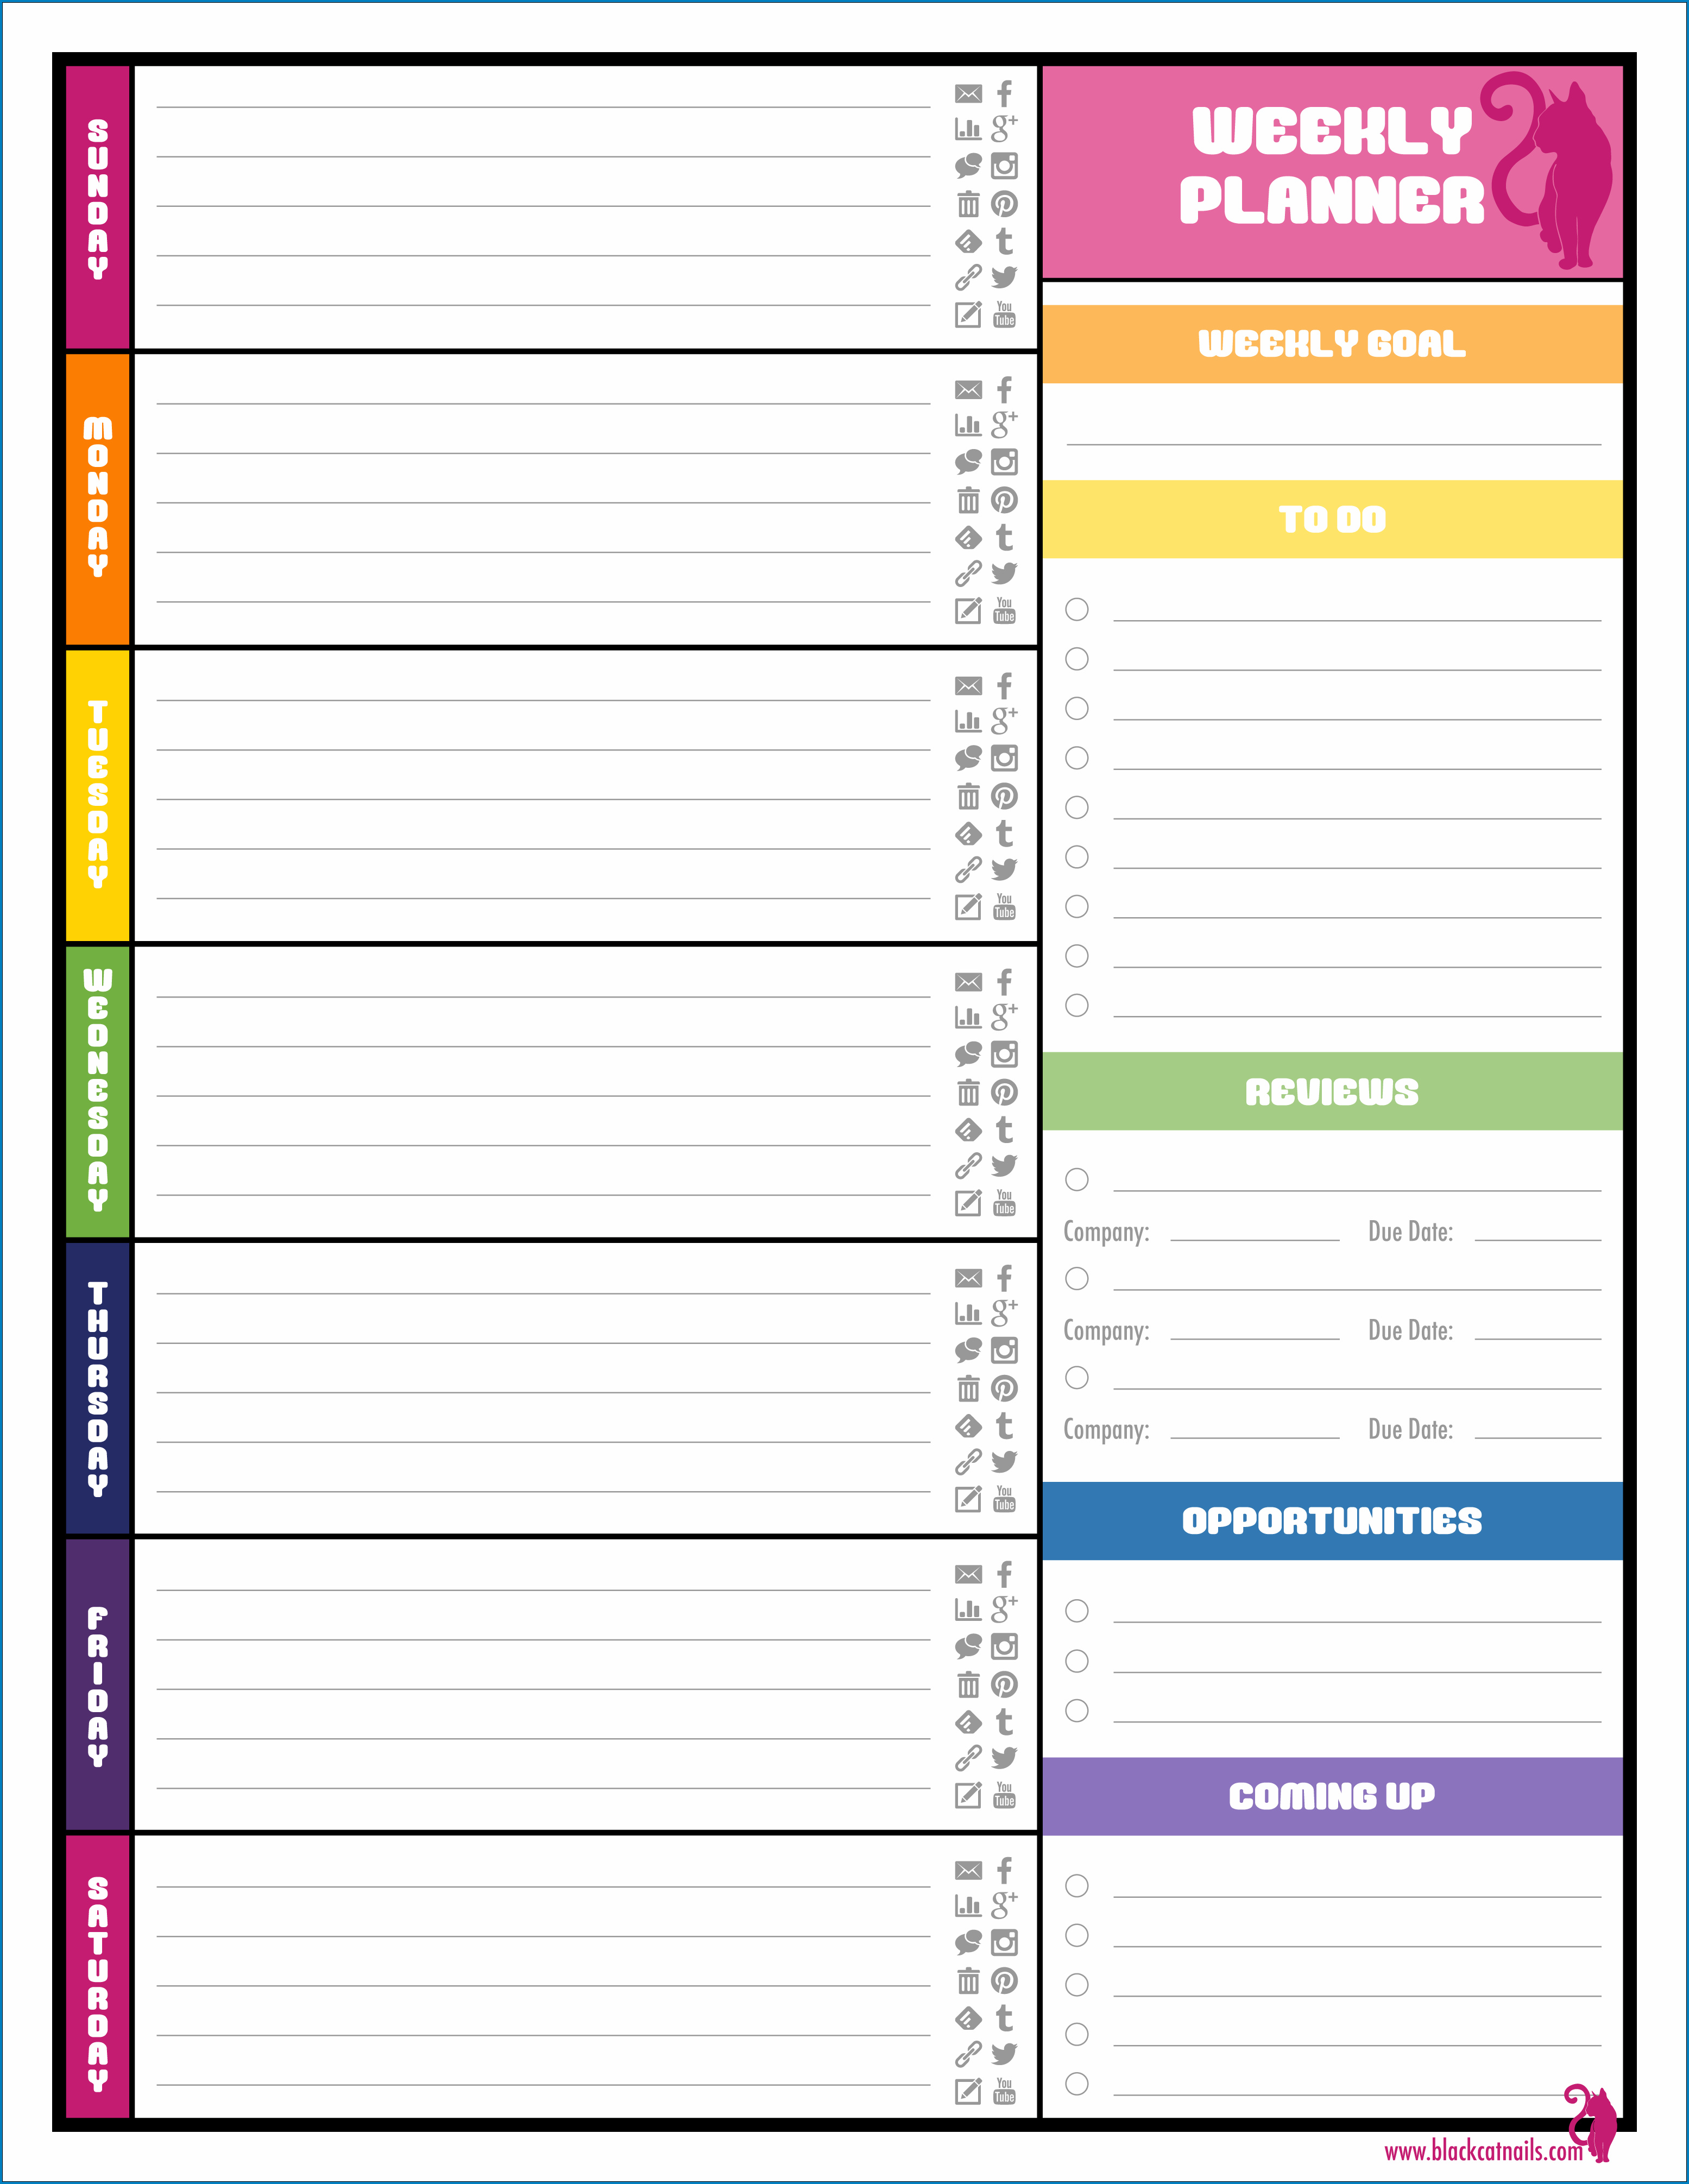 7 Day Calendar Template from www.templateral.com